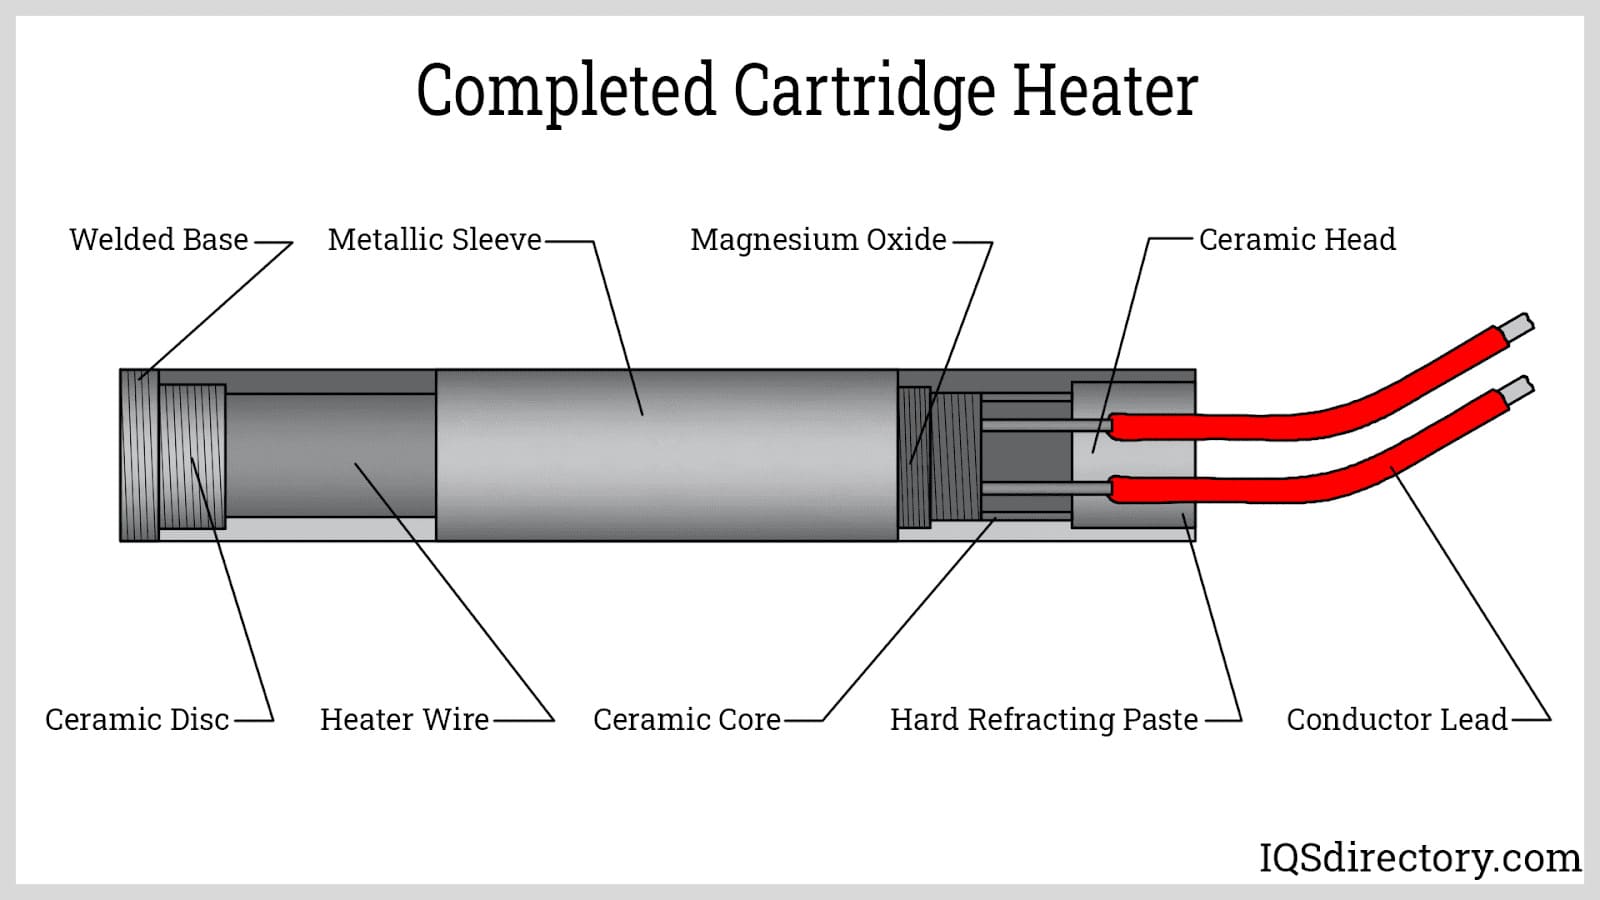 Completed Cartridge Heater